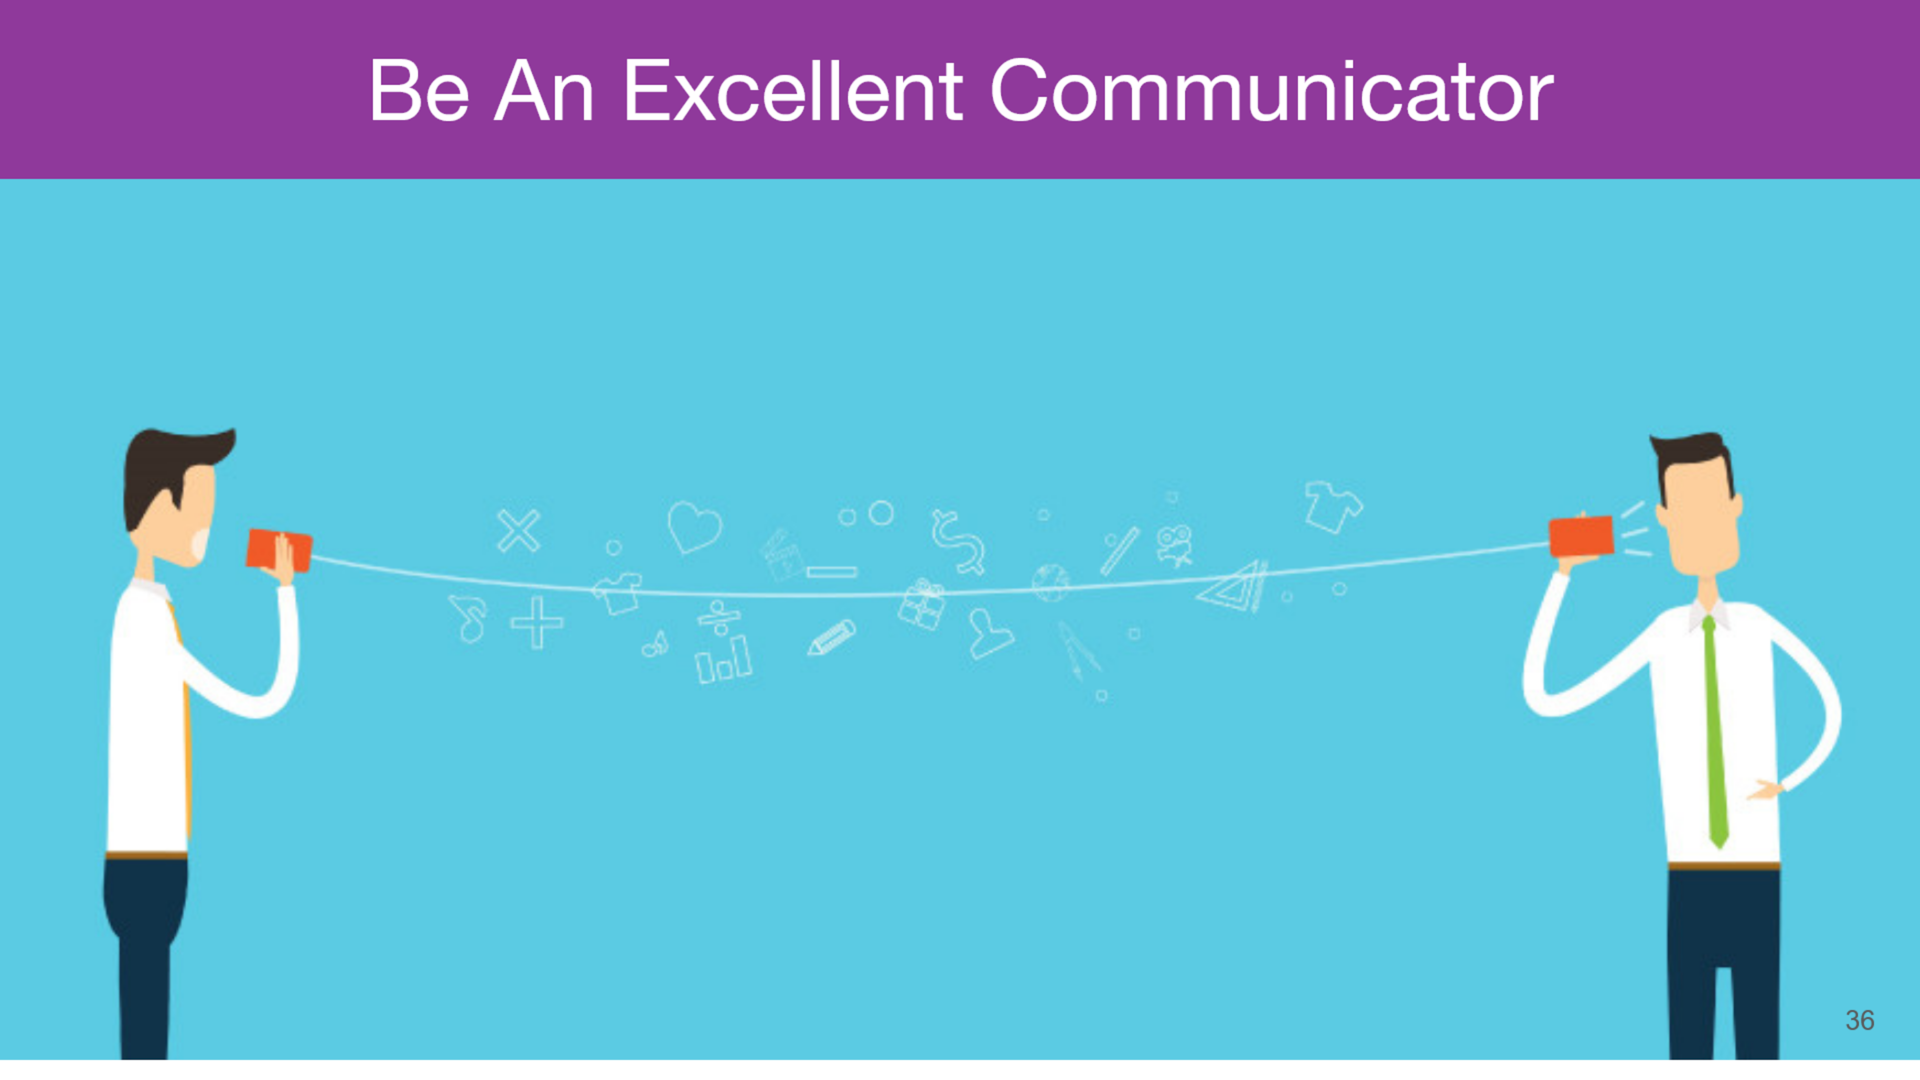 How To Be An Effective Tech Lead [Part 10] - Be An Excellent Communicator